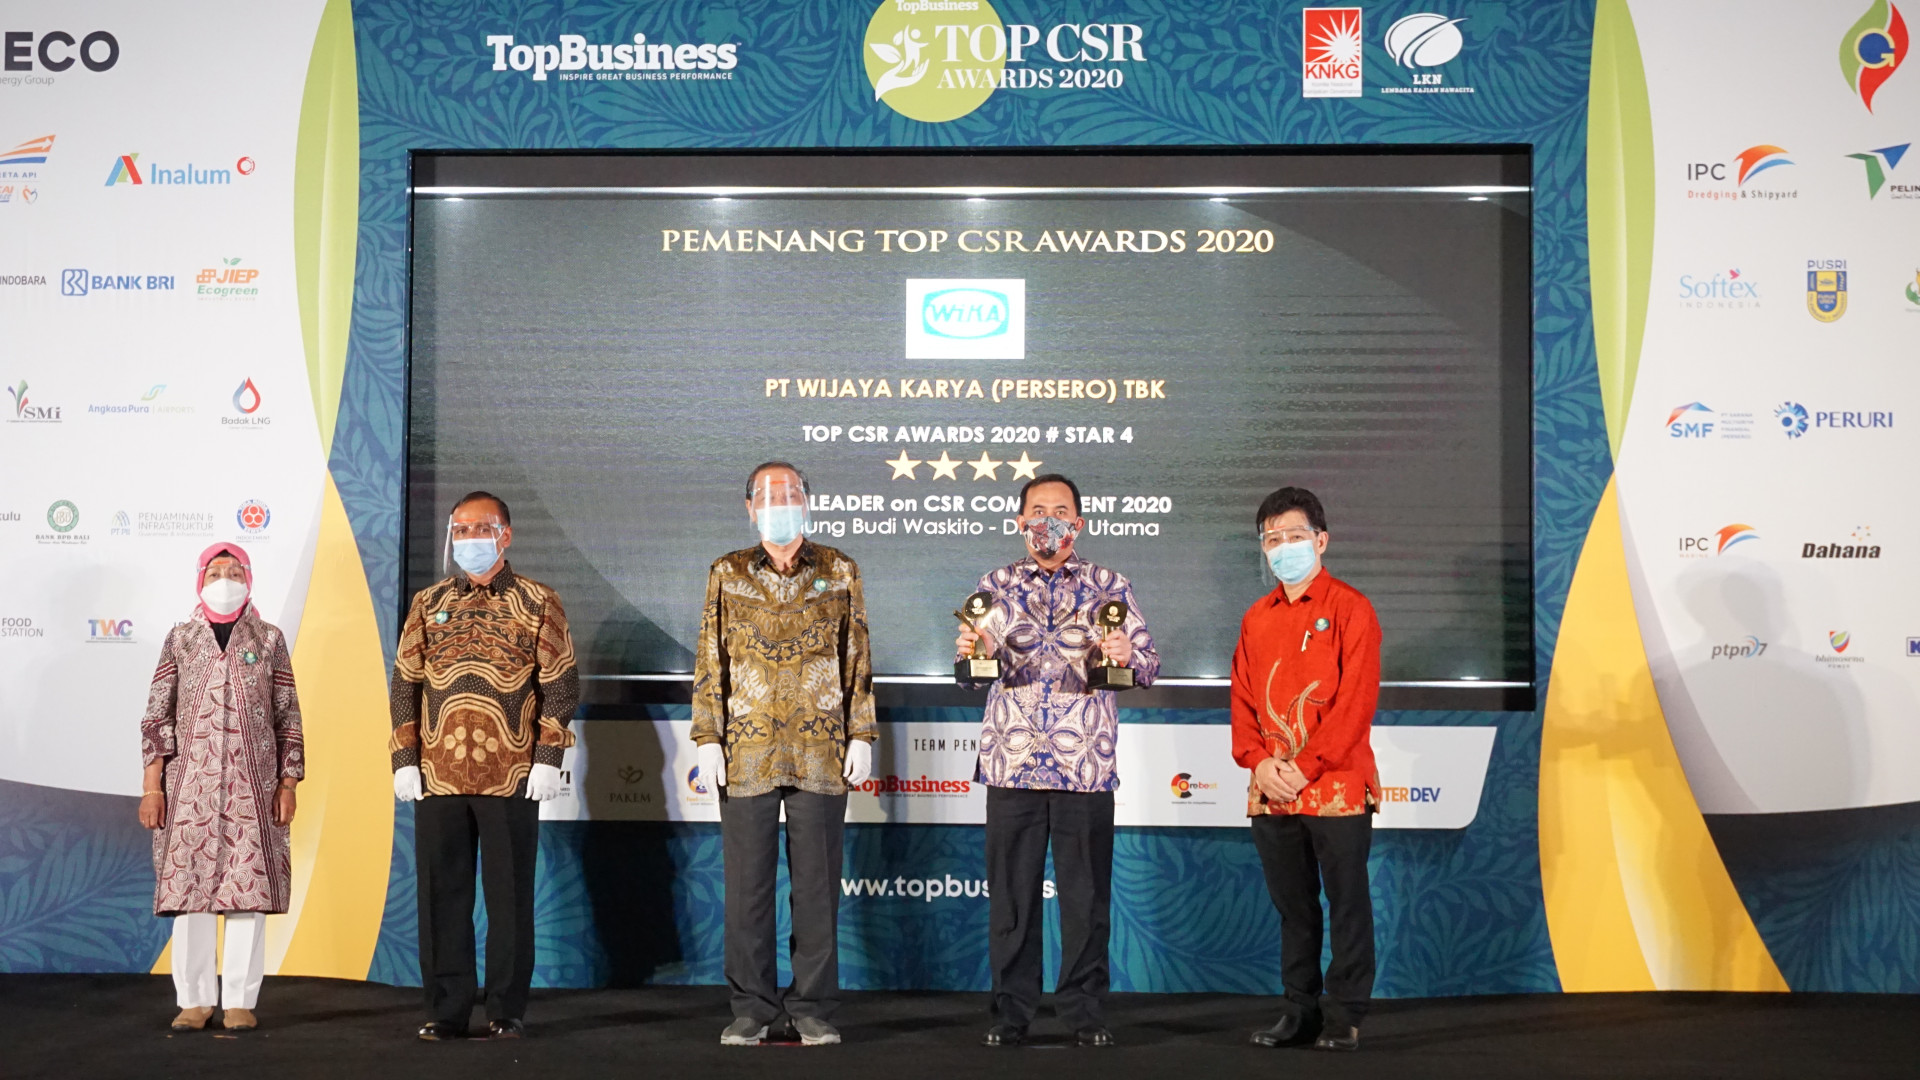 WIKA Won 2020 CSR Awards for Corporate and CEO Category Image